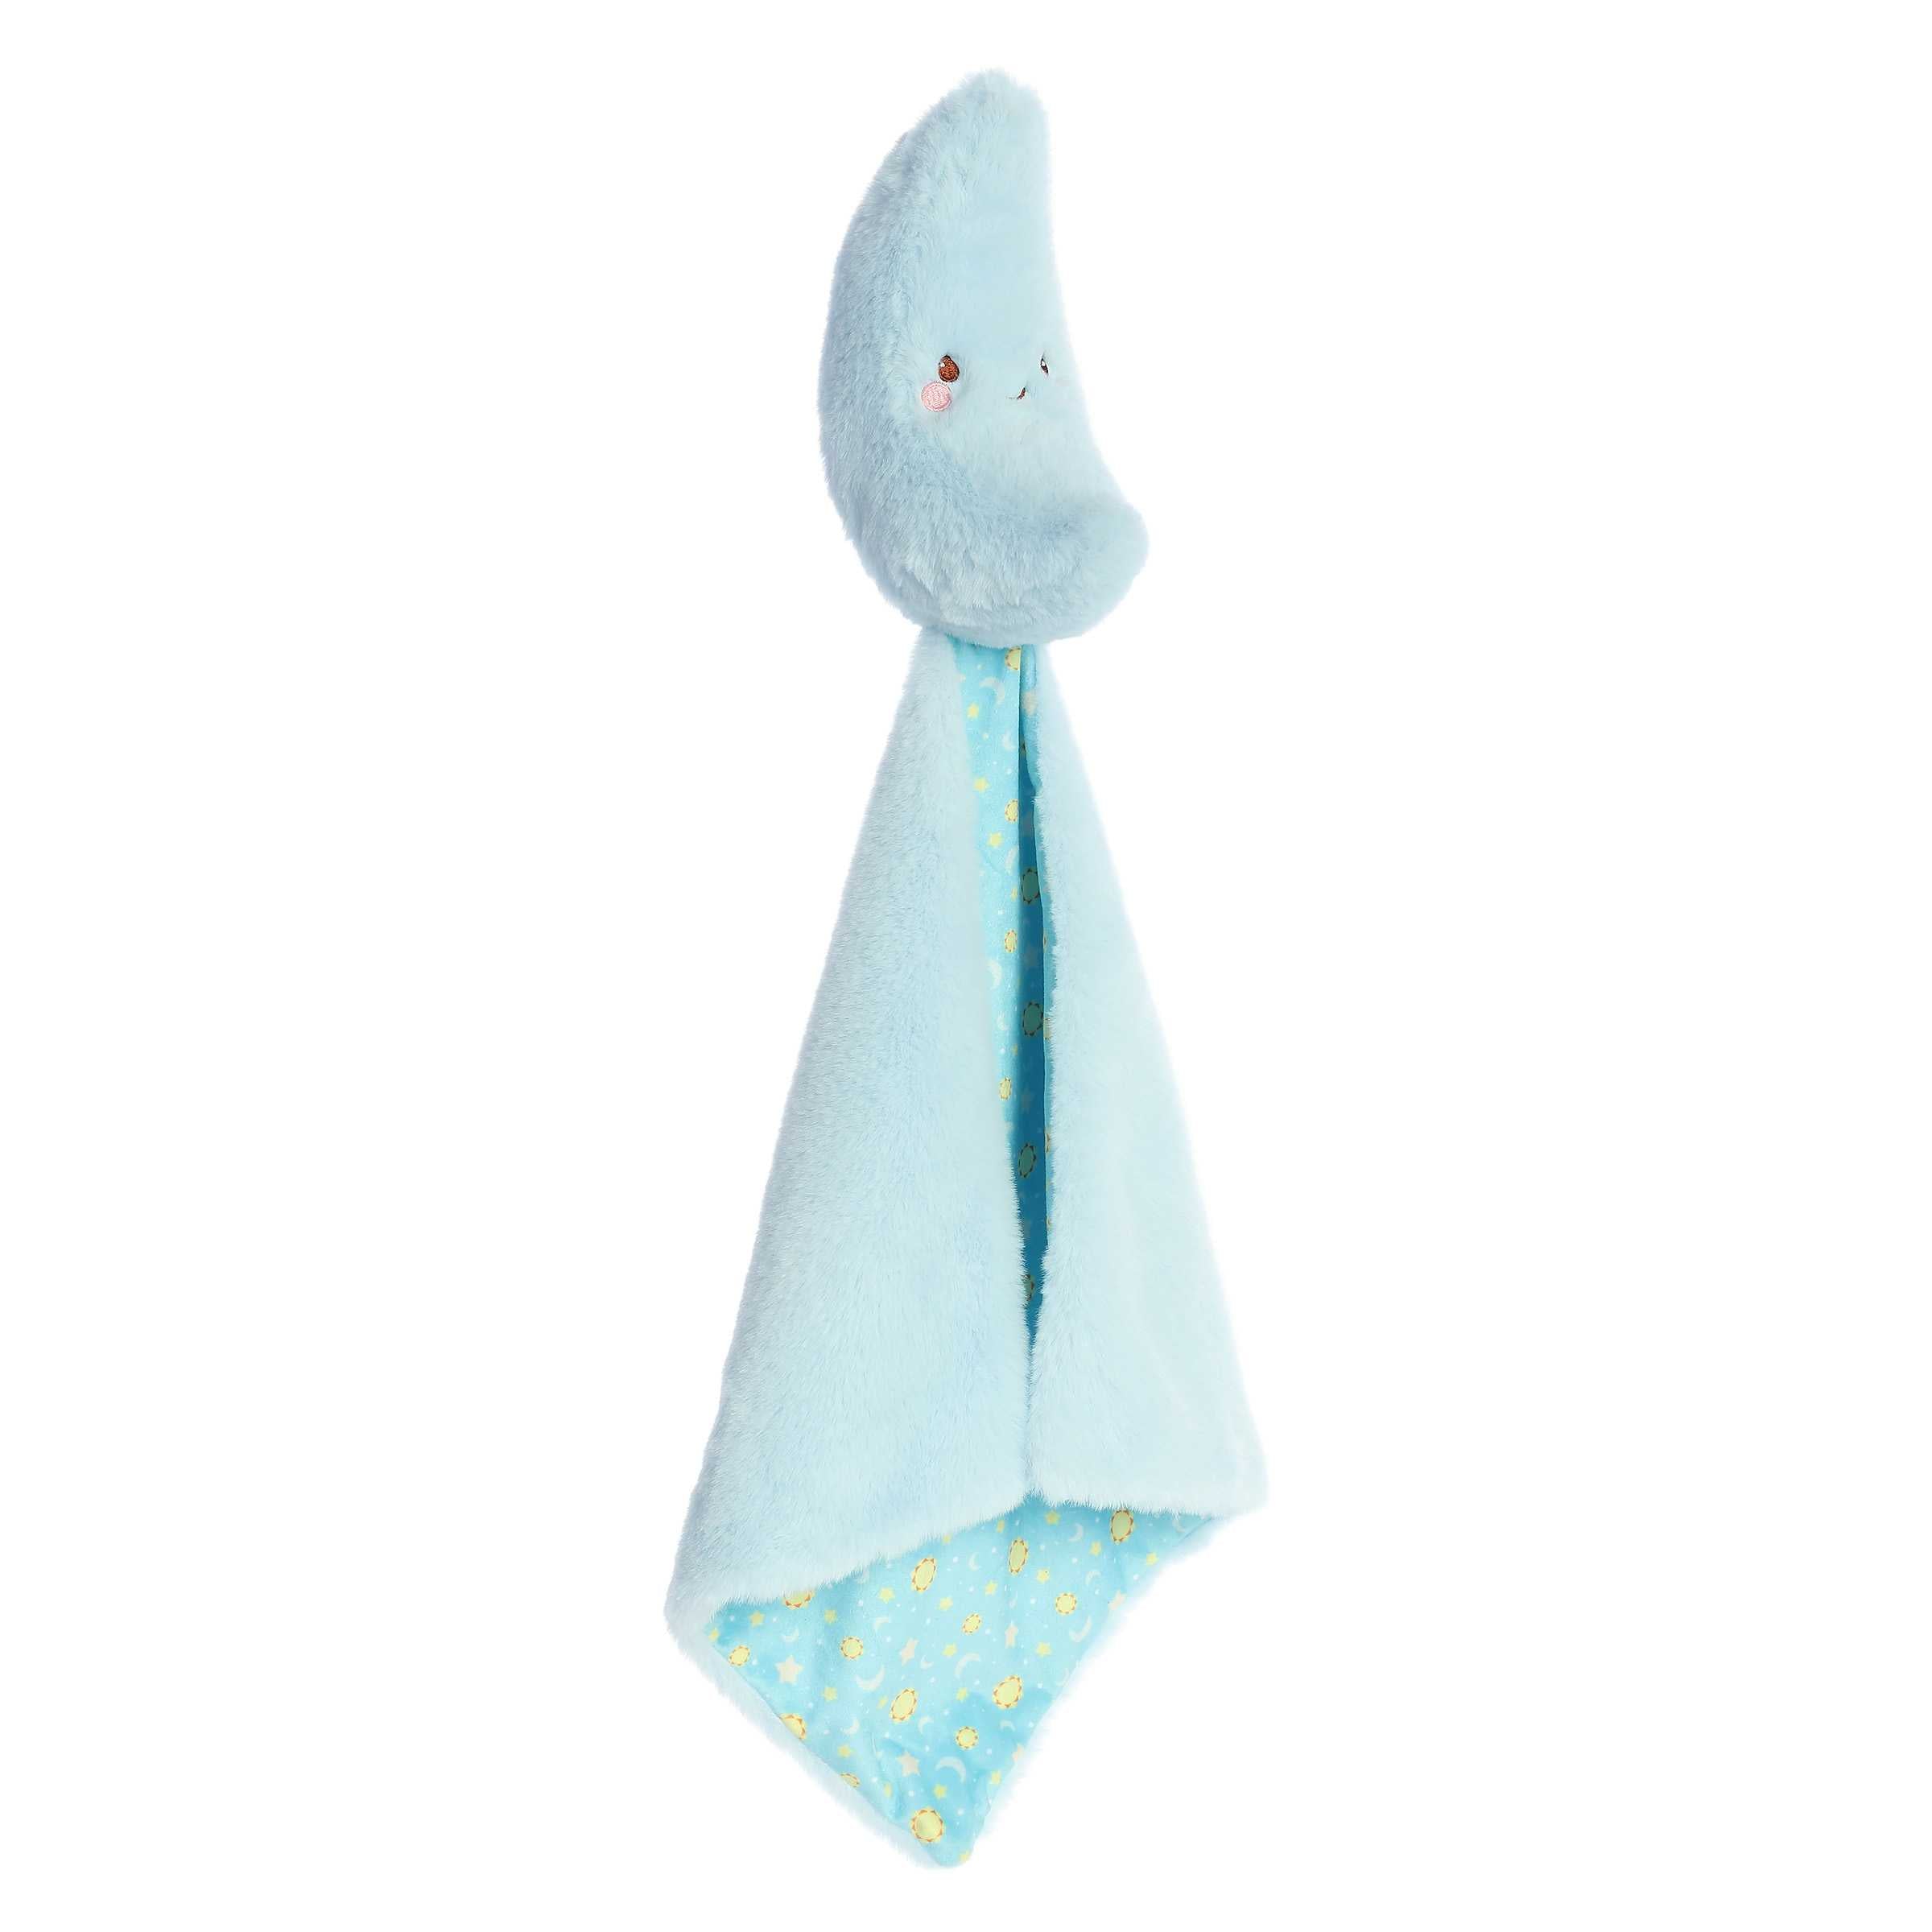 Cuddly blue Moon plush with blue smiling face and an attached square shaped baby blanket with blue fur and space design.